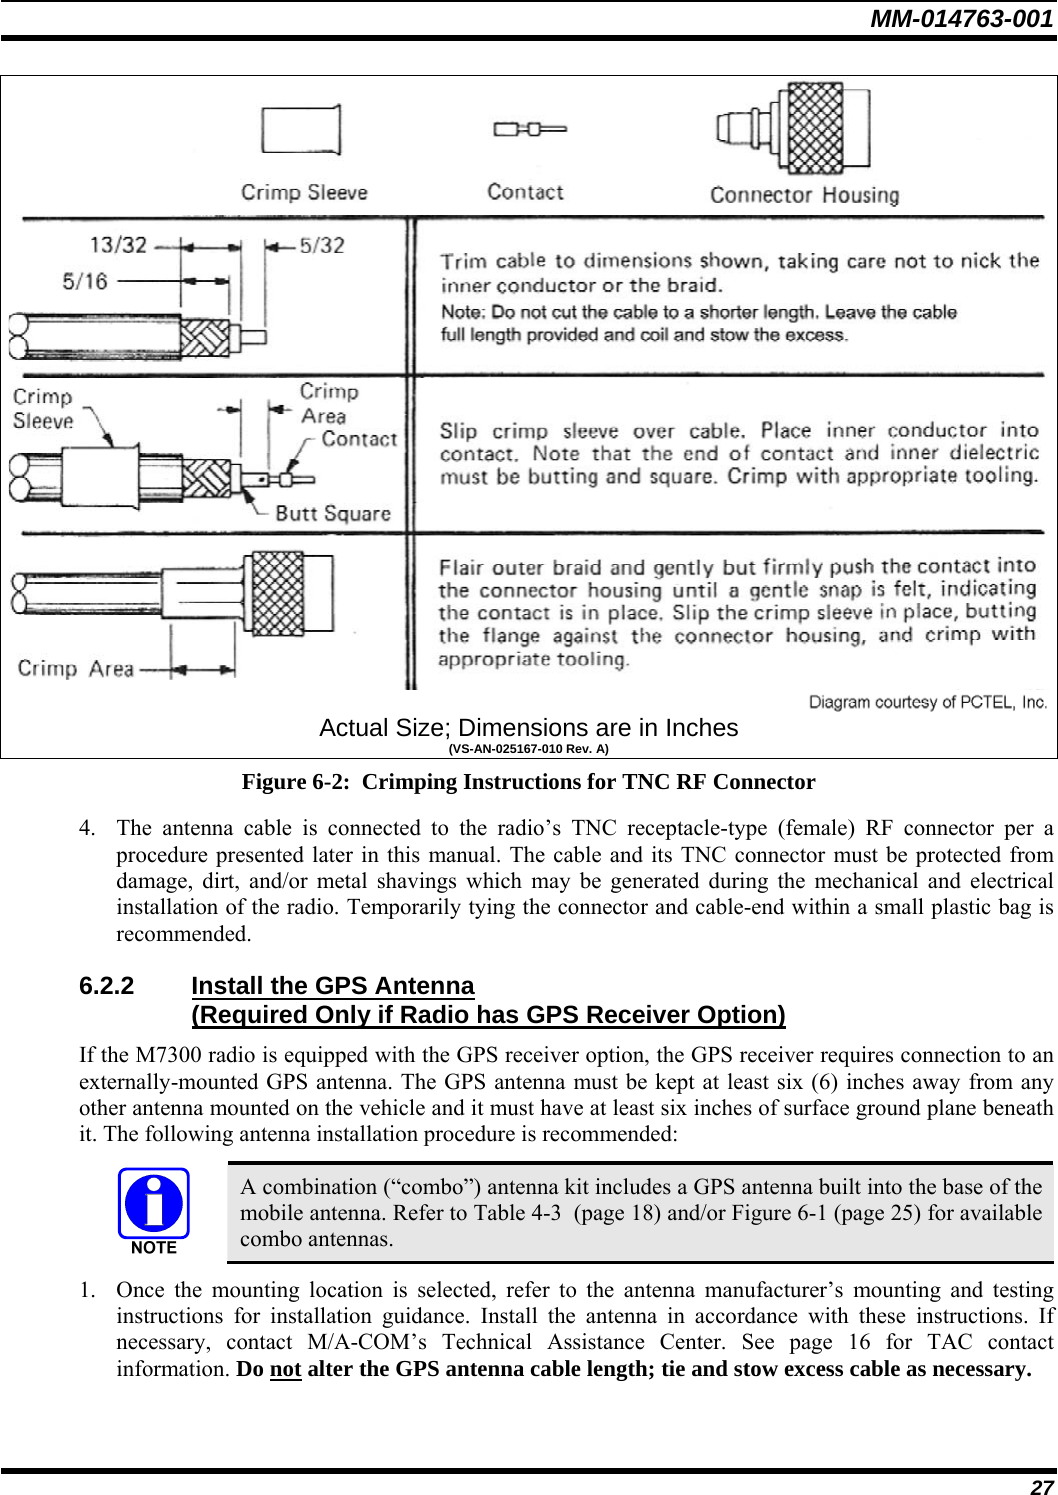 MM-014763-001 27  Actual Size; Dimensions are in Inches (VS-AN-025167-010 Rev. A) Figure 6-2:  Crimping Instructions for TNC RF Connector 4. The antenna cable is connected to the radio’s TNC receptacle-type (female) RF connector per a procedure presented later in this manual. The cable and its TNC connector must be protected from damage, dirt, and/or metal shavings which may be generated during the mechanical and electrical installation of the radio. Temporarily tying the connector and cable-end within a small plastic bag is recommended. 6.2.2  Install the GPS Antenna  (Required Only if Radio has GPS Receiver Option) If the M7300 radio is equipped with the GPS receiver option, the GPS receiver requires connection to an externally-mounted GPS antenna. The GPS antenna must be kept at least six (6) inches away from any other antenna mounted on the vehicle and it must have at least six inches of surface ground plane beneath it. The following antenna installation procedure is recommended:   A combination (“combo”) antenna kit includes a GPS antenna built into the base of the mobile antenna. Refer to Table 4-3  (page 18) and/or Figure 6-1 (page 25) for available combo antennas. 1. Once the mounting location is selected, refer to the antenna manufacturer’s mounting and testing instructions for installation guidance. Install the antenna in accordance with these instructions. If necessary, contact M/A-COM’s Technical Assistance Center. See page 16 for TAC contact information. Do not alter the GPS antenna cable length; tie and stow excess cable as necessary. 